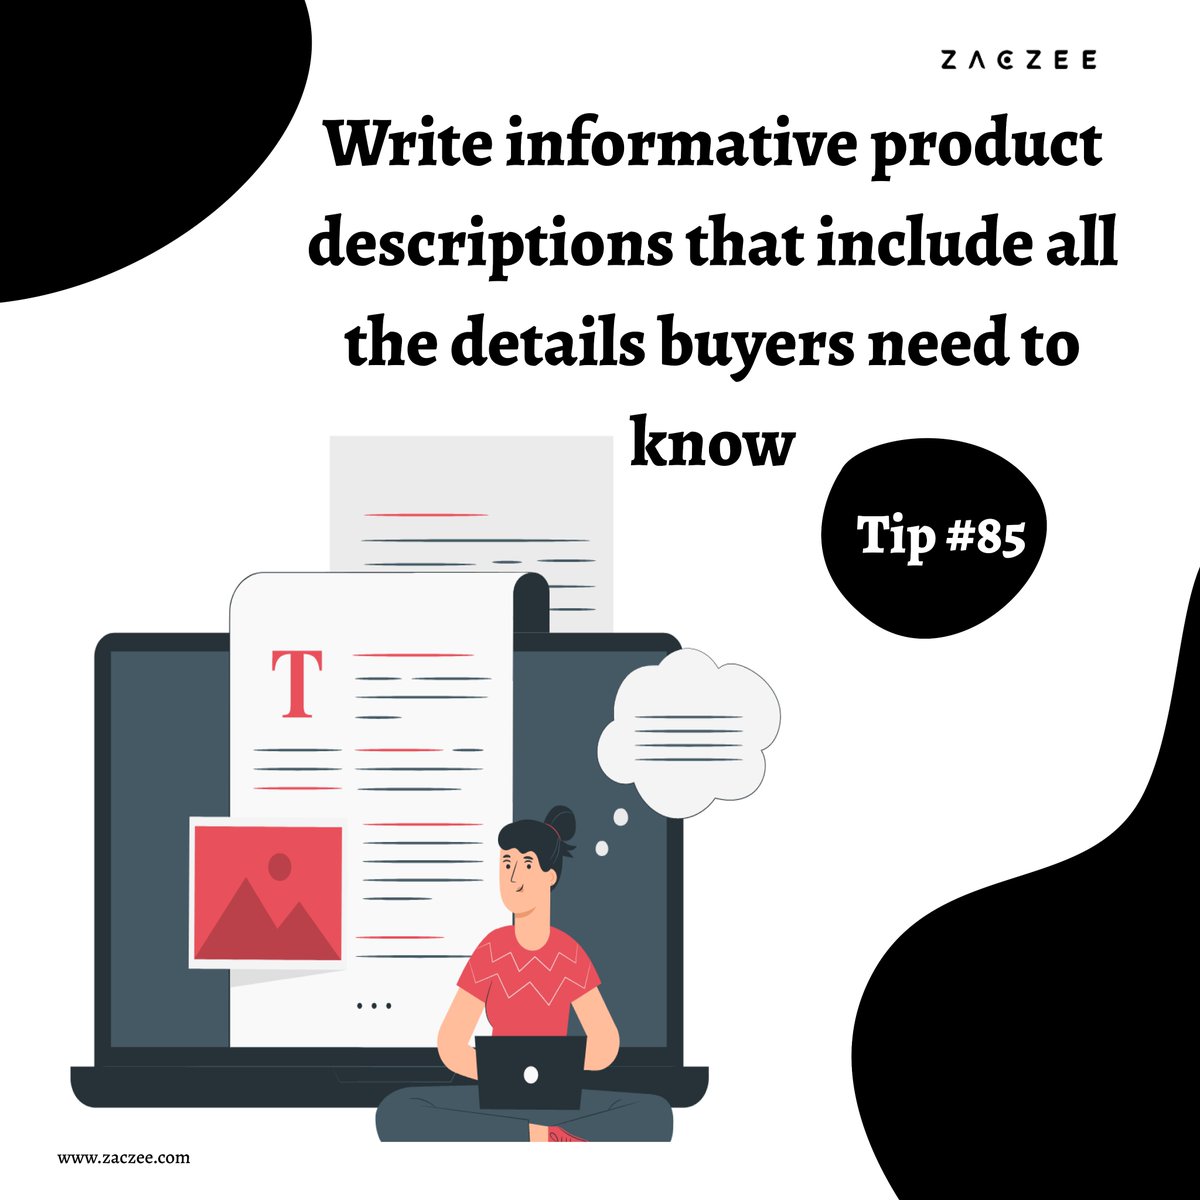 When it comes to writing informative product descriptions, there are several key details that buyers will want to know about the product.

#zaczee #shopifyseoagency #shopifyseoexperts #seoservices #shippingpolicy #ecommerce #shopifywebsite #socialproof #webdesign #trust